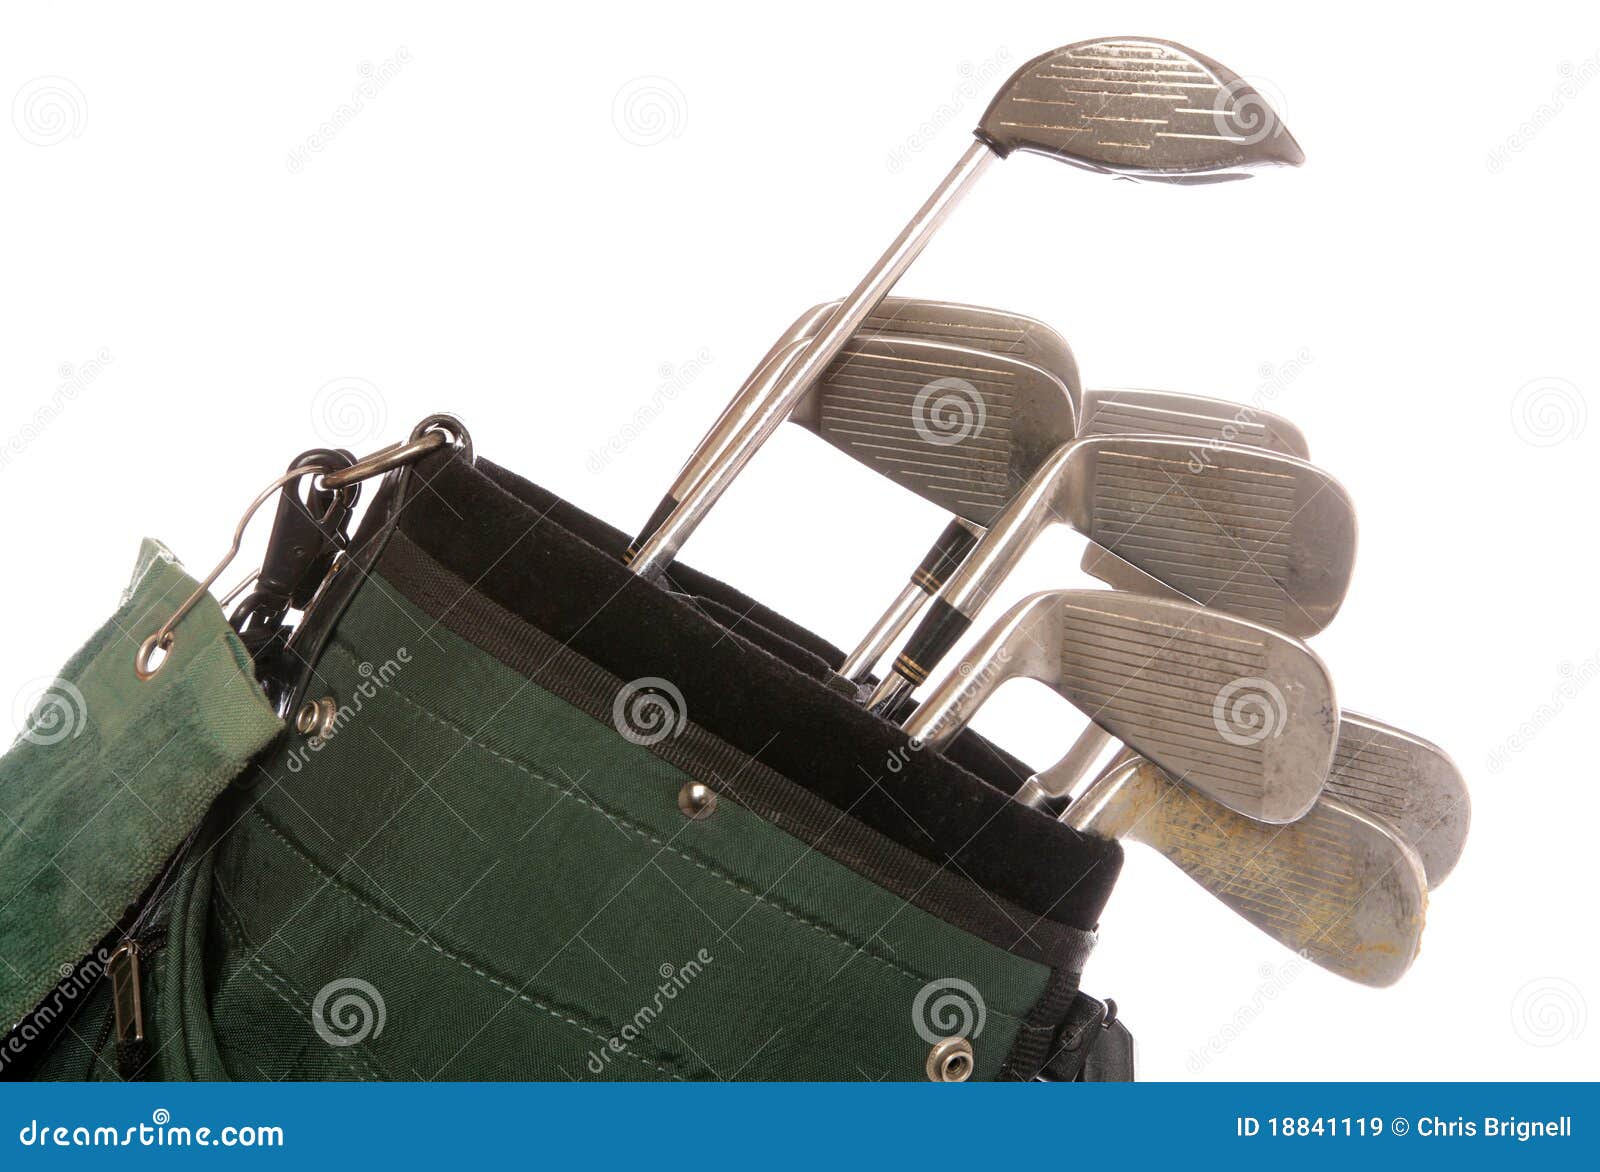 Set of used golf clubs stock image. Image of clubs, cutout - 18841119